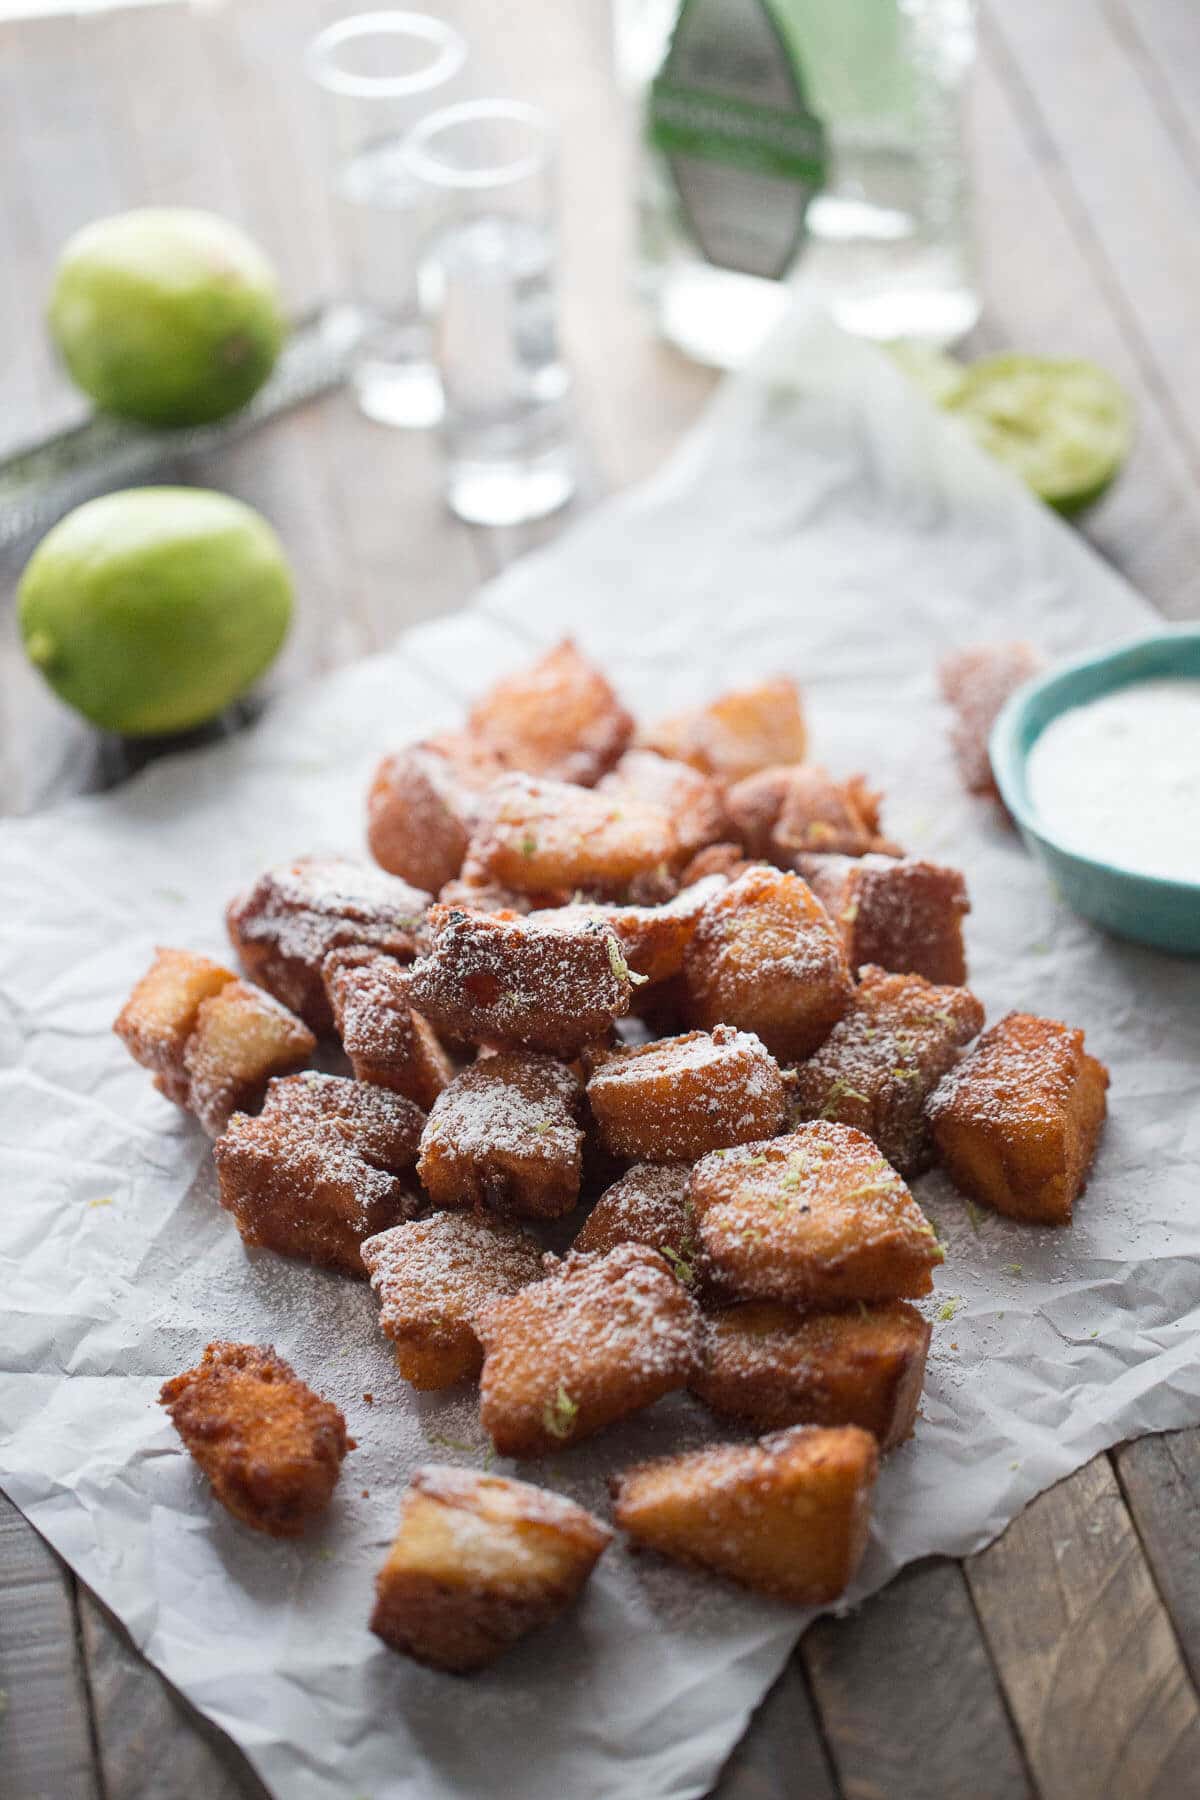 Angel food cake and tequila come together in these easy fried tequila shots!